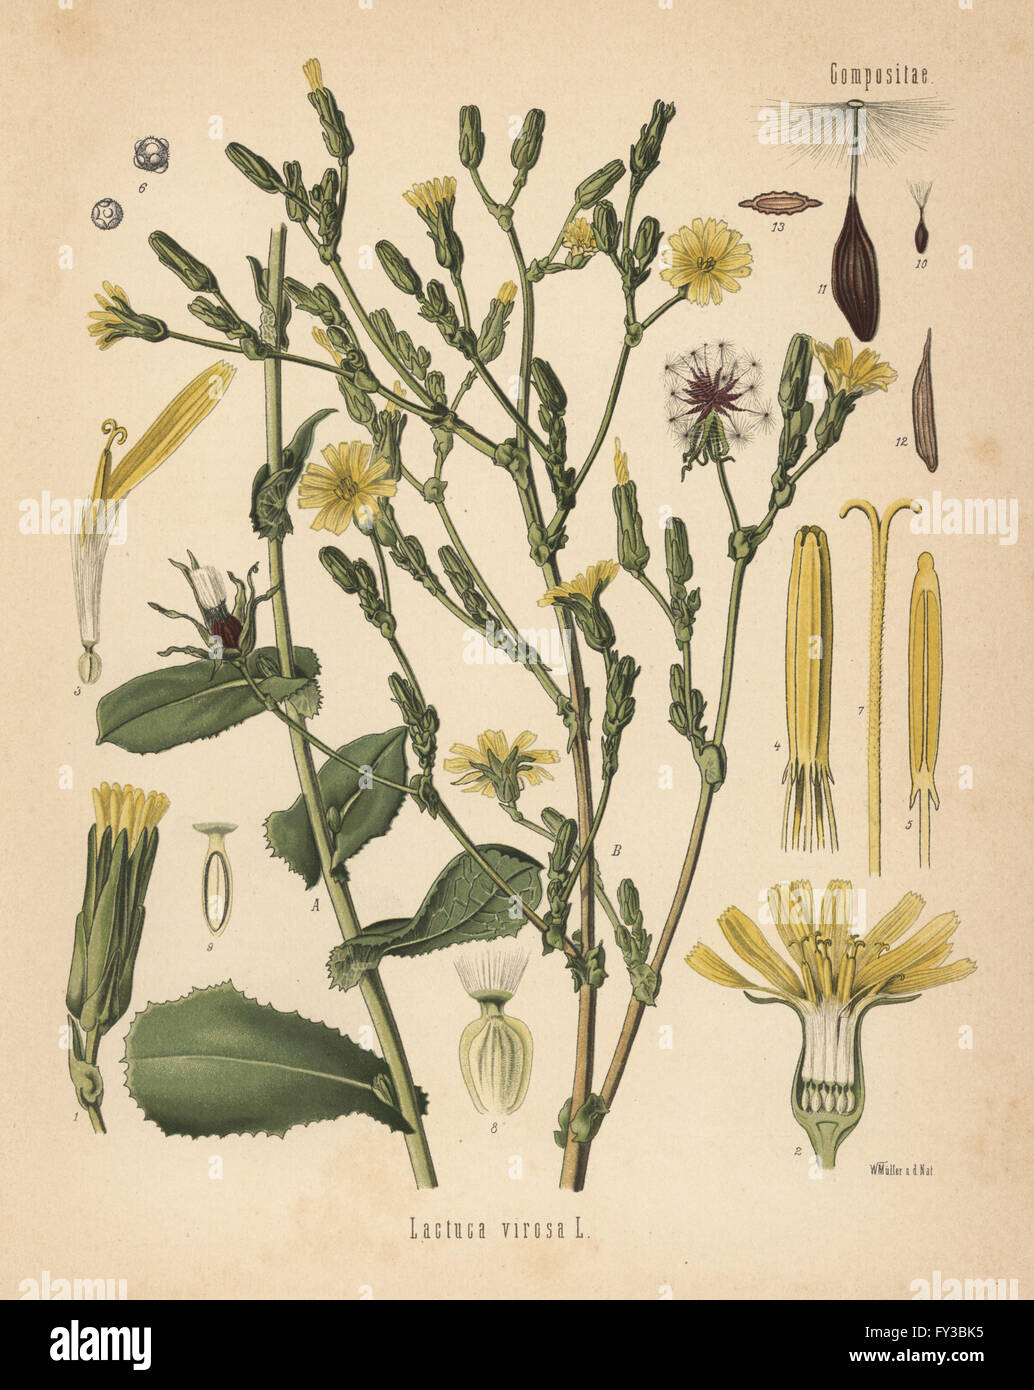 Wild lettuce or bitter lettuce, Lactuca virosa. Chromolithograph after a botanical illustration by Walther Muller from Hermann Adolph Koehler's Medicinal Plants, edited by Gustav Pabst, Koehler, Germany, 1887. Stock Photo